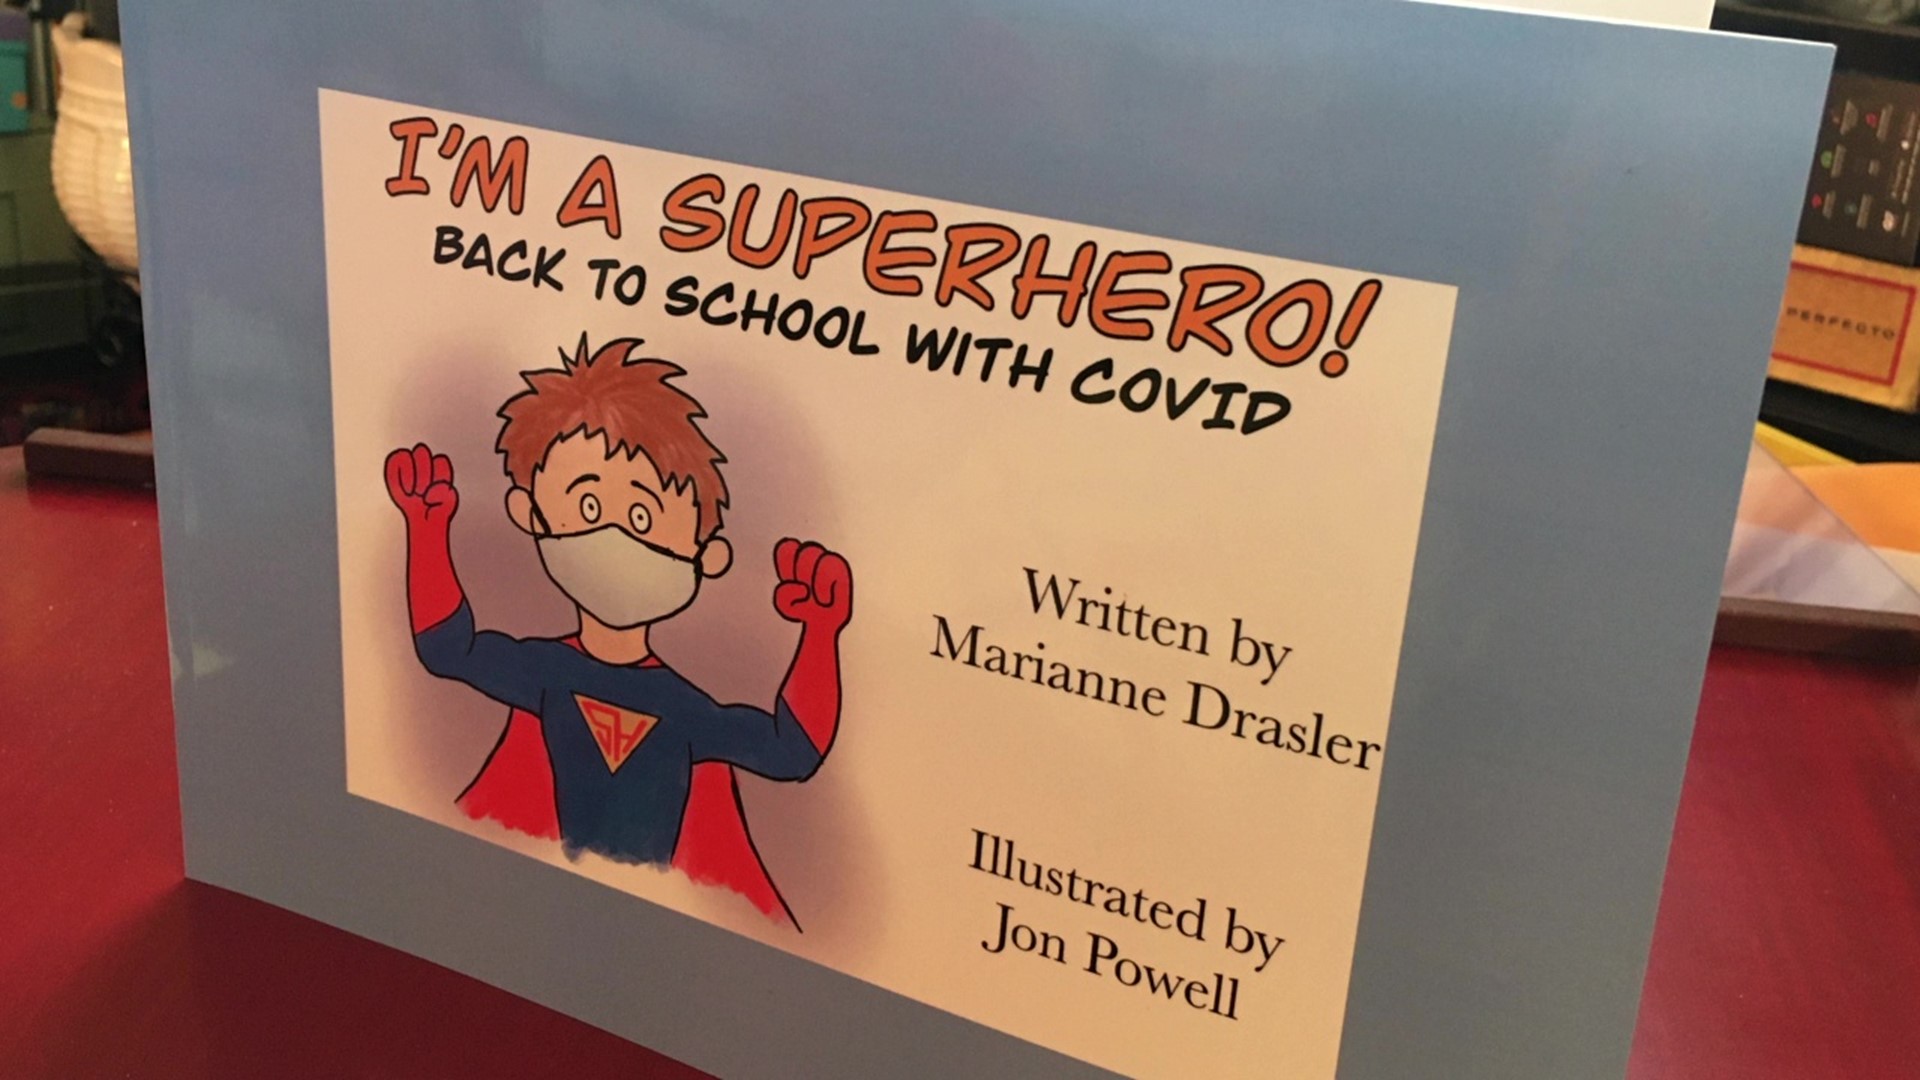 "I'm a Superhero! Back to School with COVID" is teaching students about the coronavirus and why they have to wear a mask.